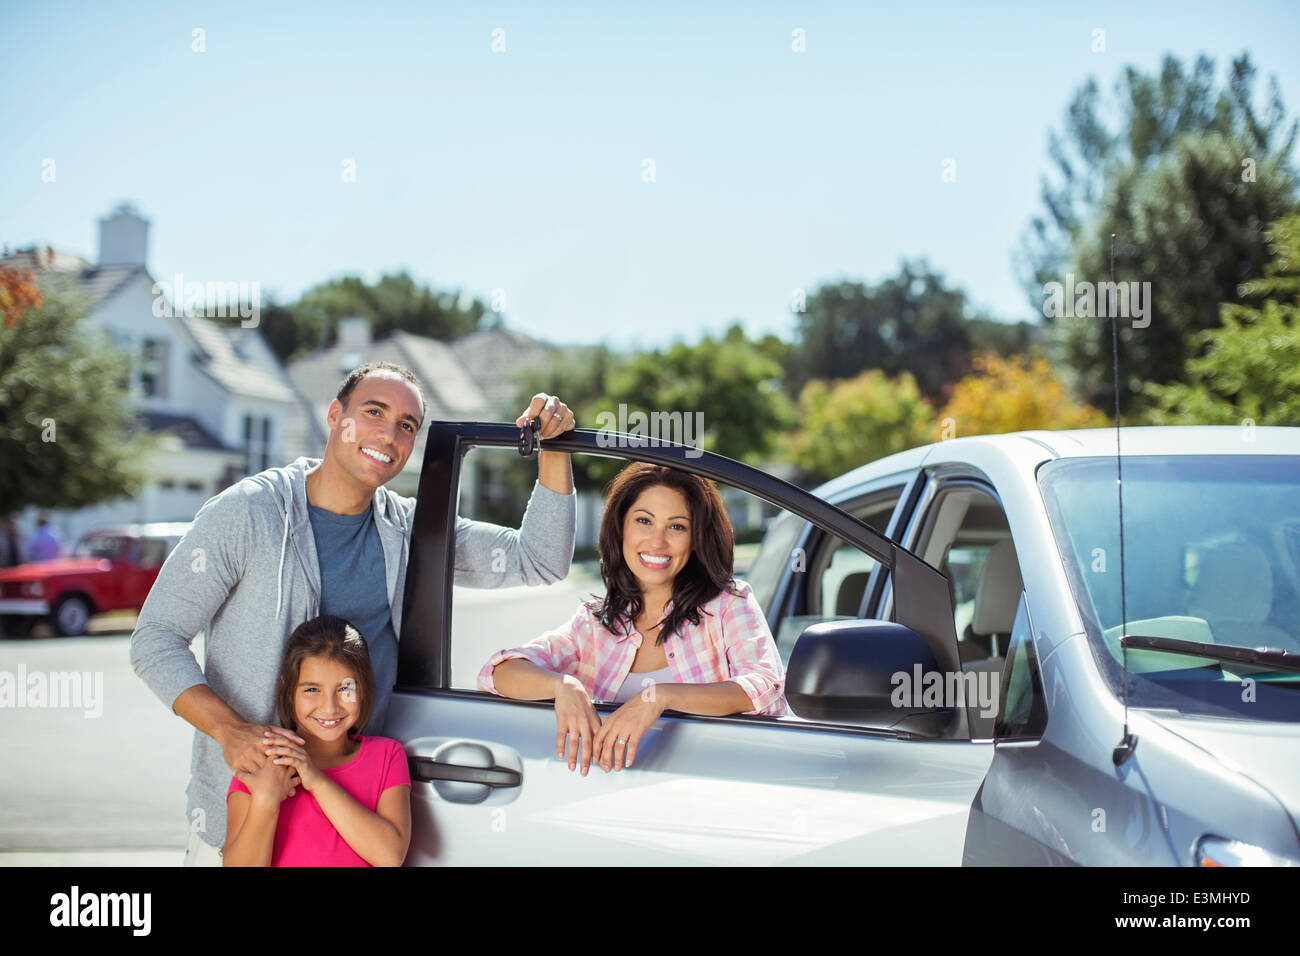 Portrait of family at car in driveway Stock Photo